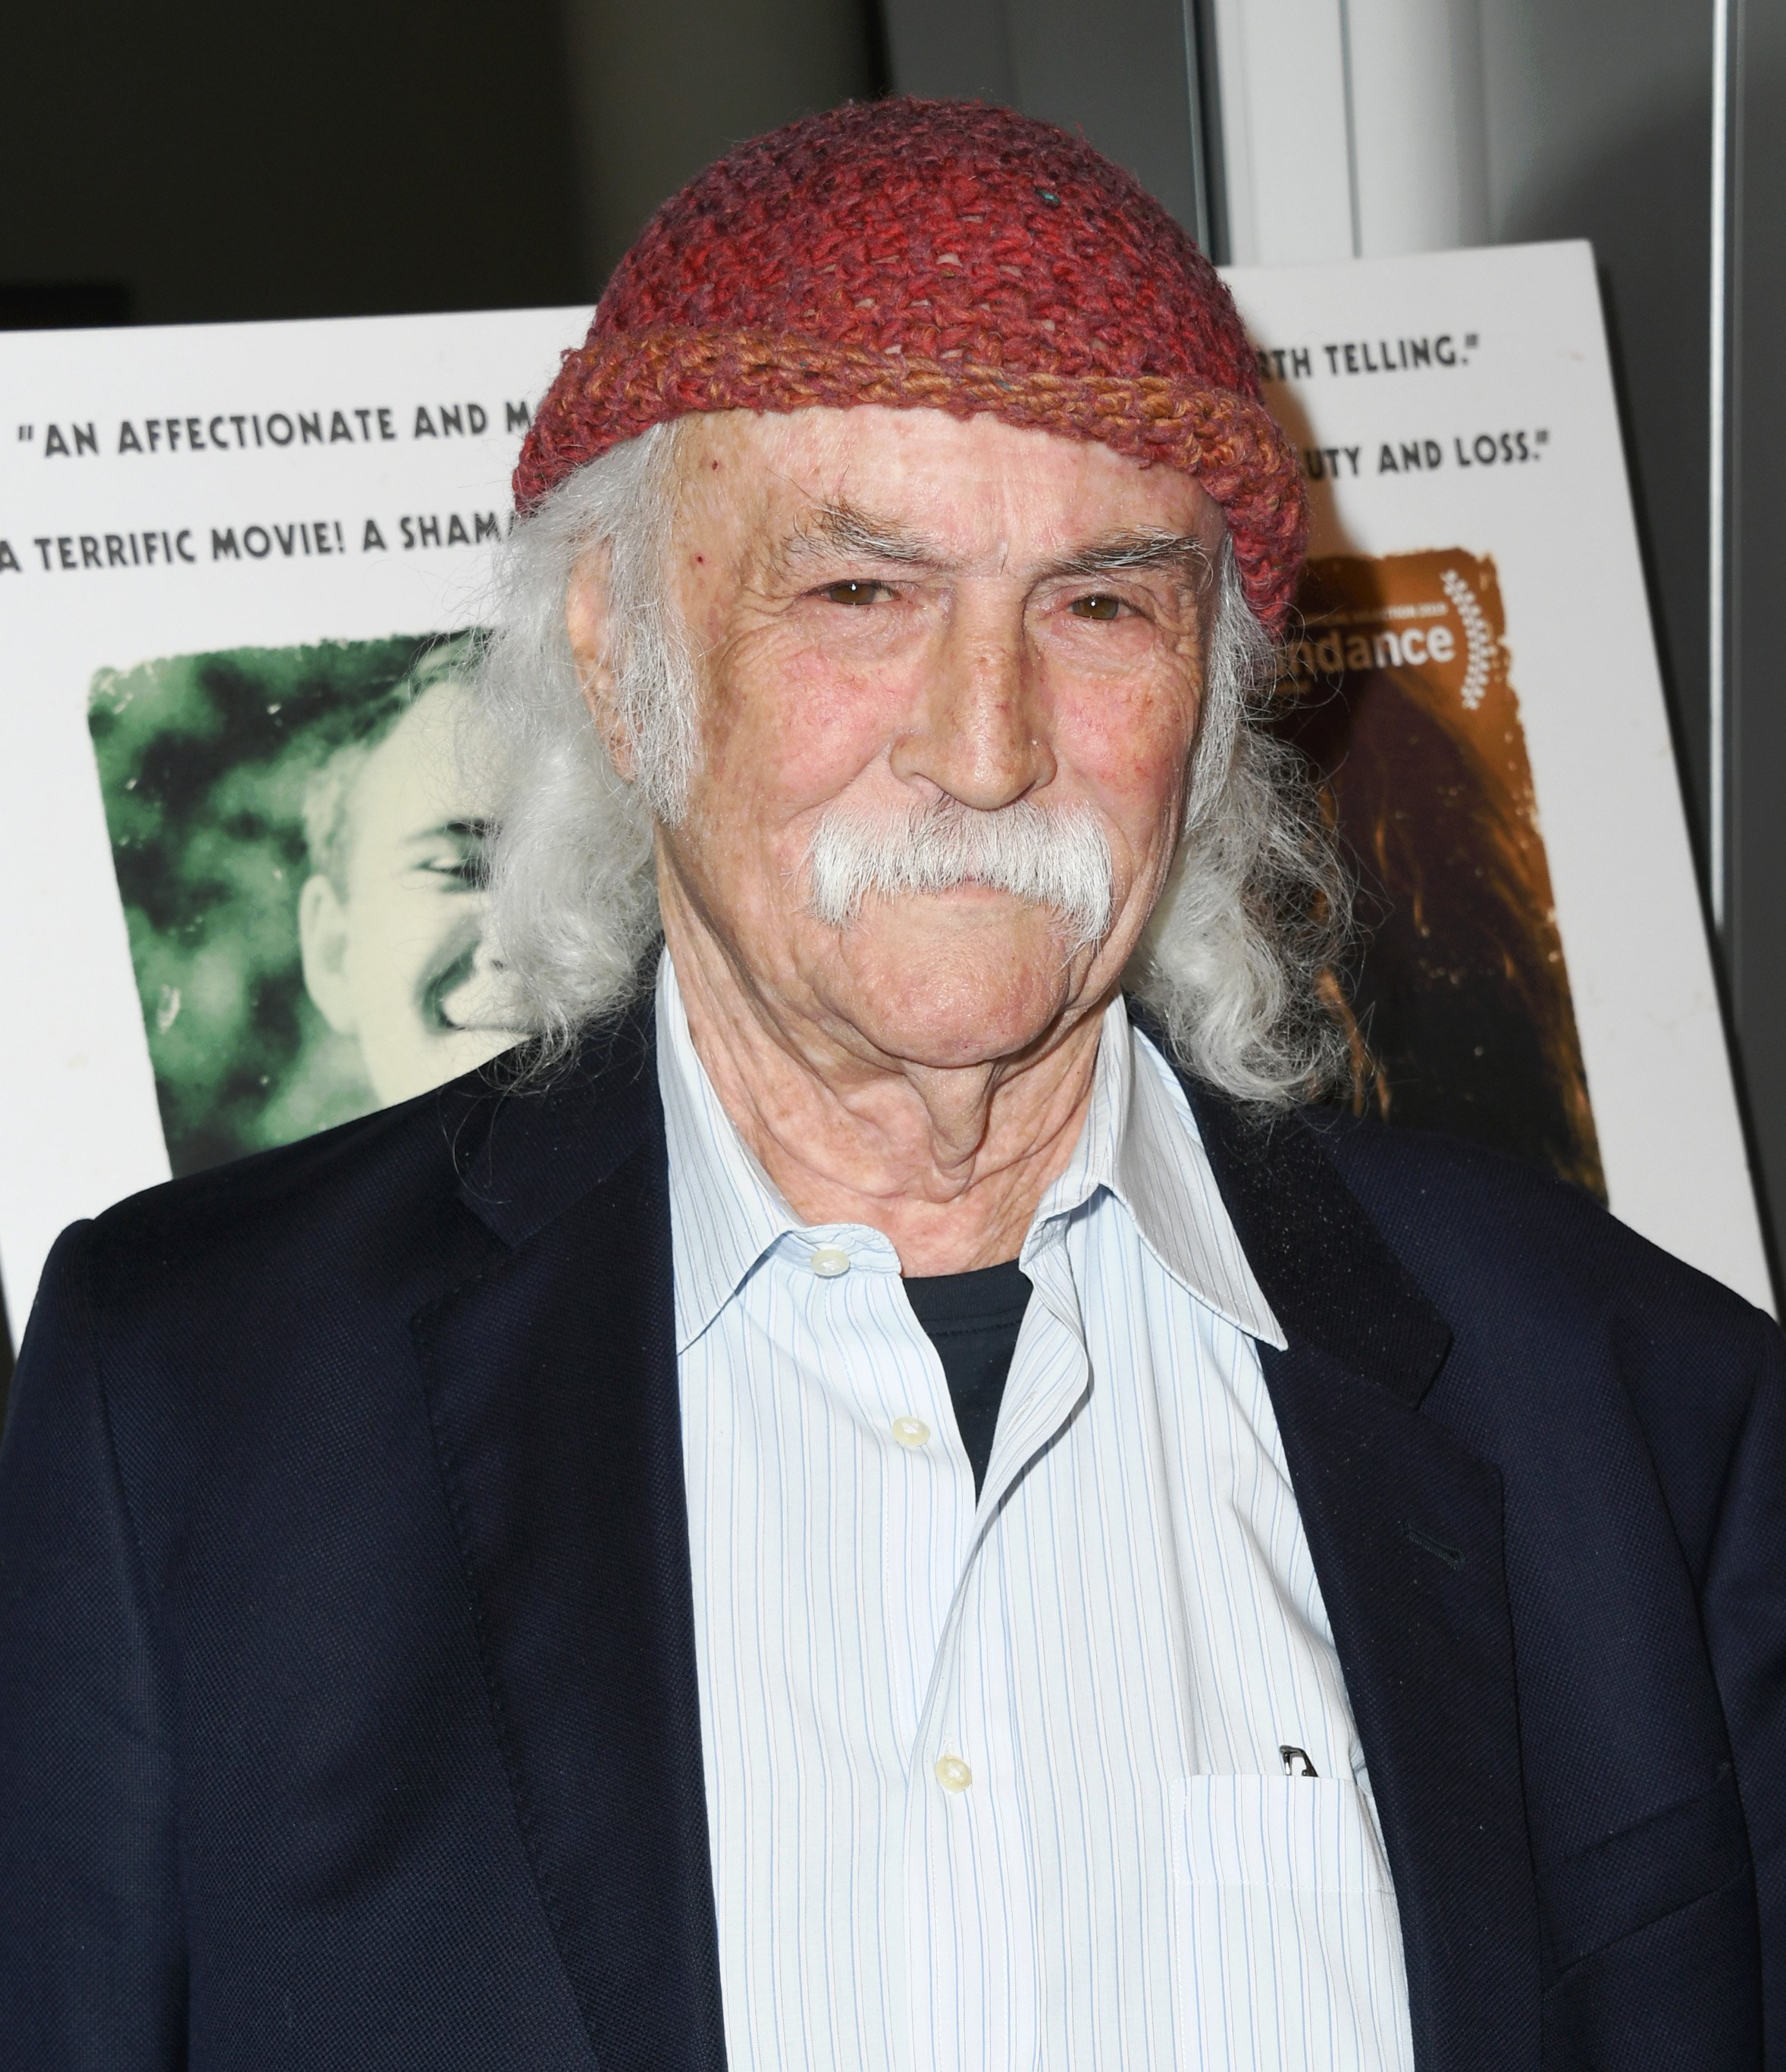 David Crosby at Linwood Dunn Theater on July 18, 2019, in Los Angeles, California. | Source: Getty Images